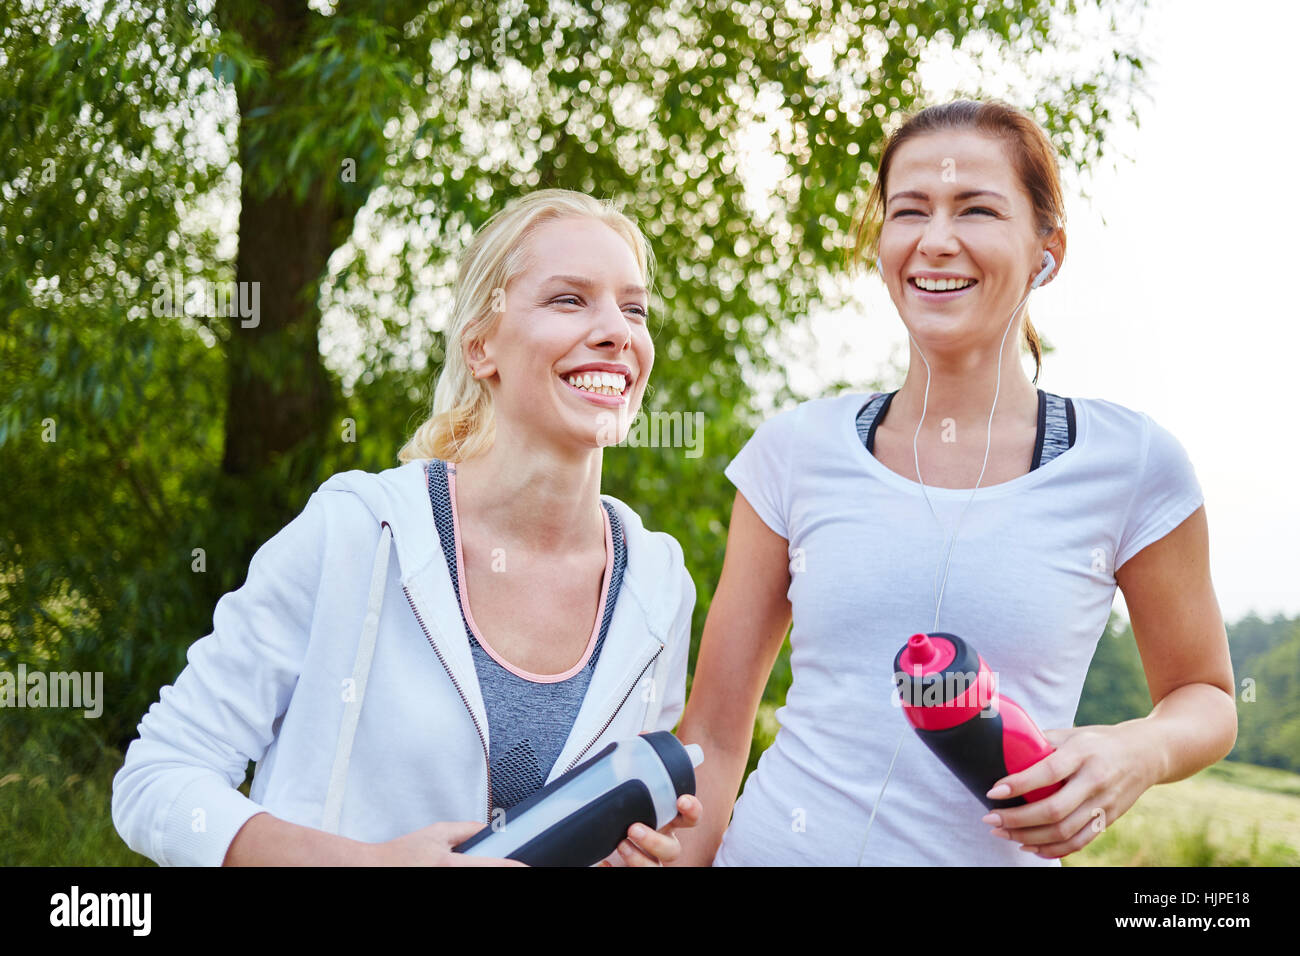 Two sporty women laughing after fitness training Stock Photo